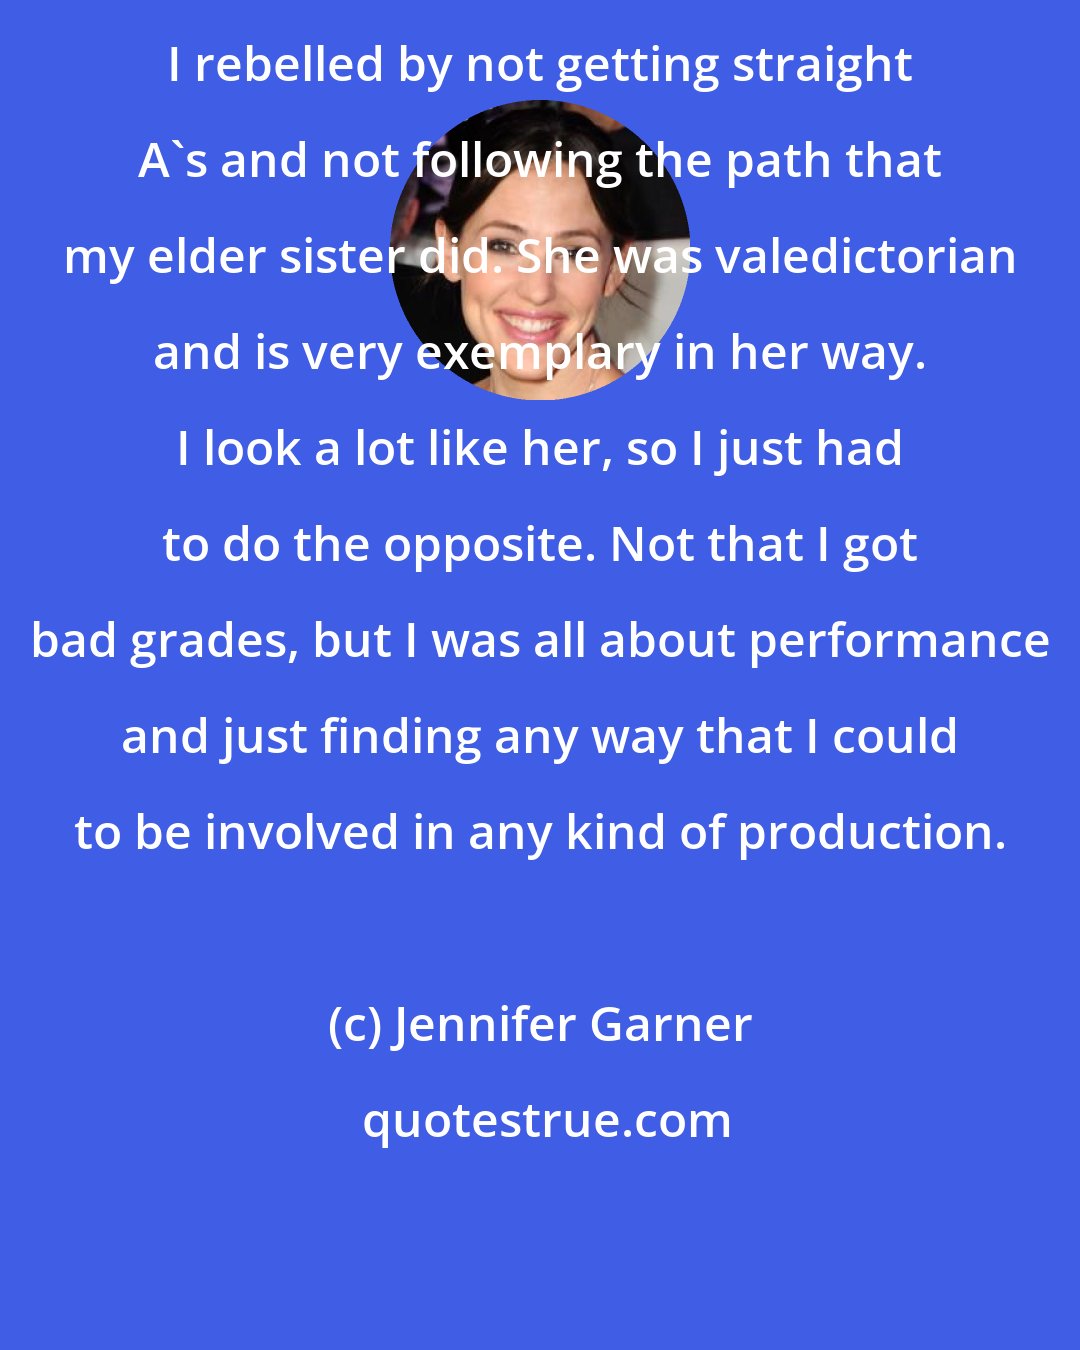 Jennifer Garner: I rebelled by not getting straight A's and not following the path that my elder sister did. She was valedictorian and is very exemplary in her way. I look a lot like her, so I just had to do the opposite. Not that I got bad grades, but I was all about performance and just finding any way that I could to be involved in any kind of production.